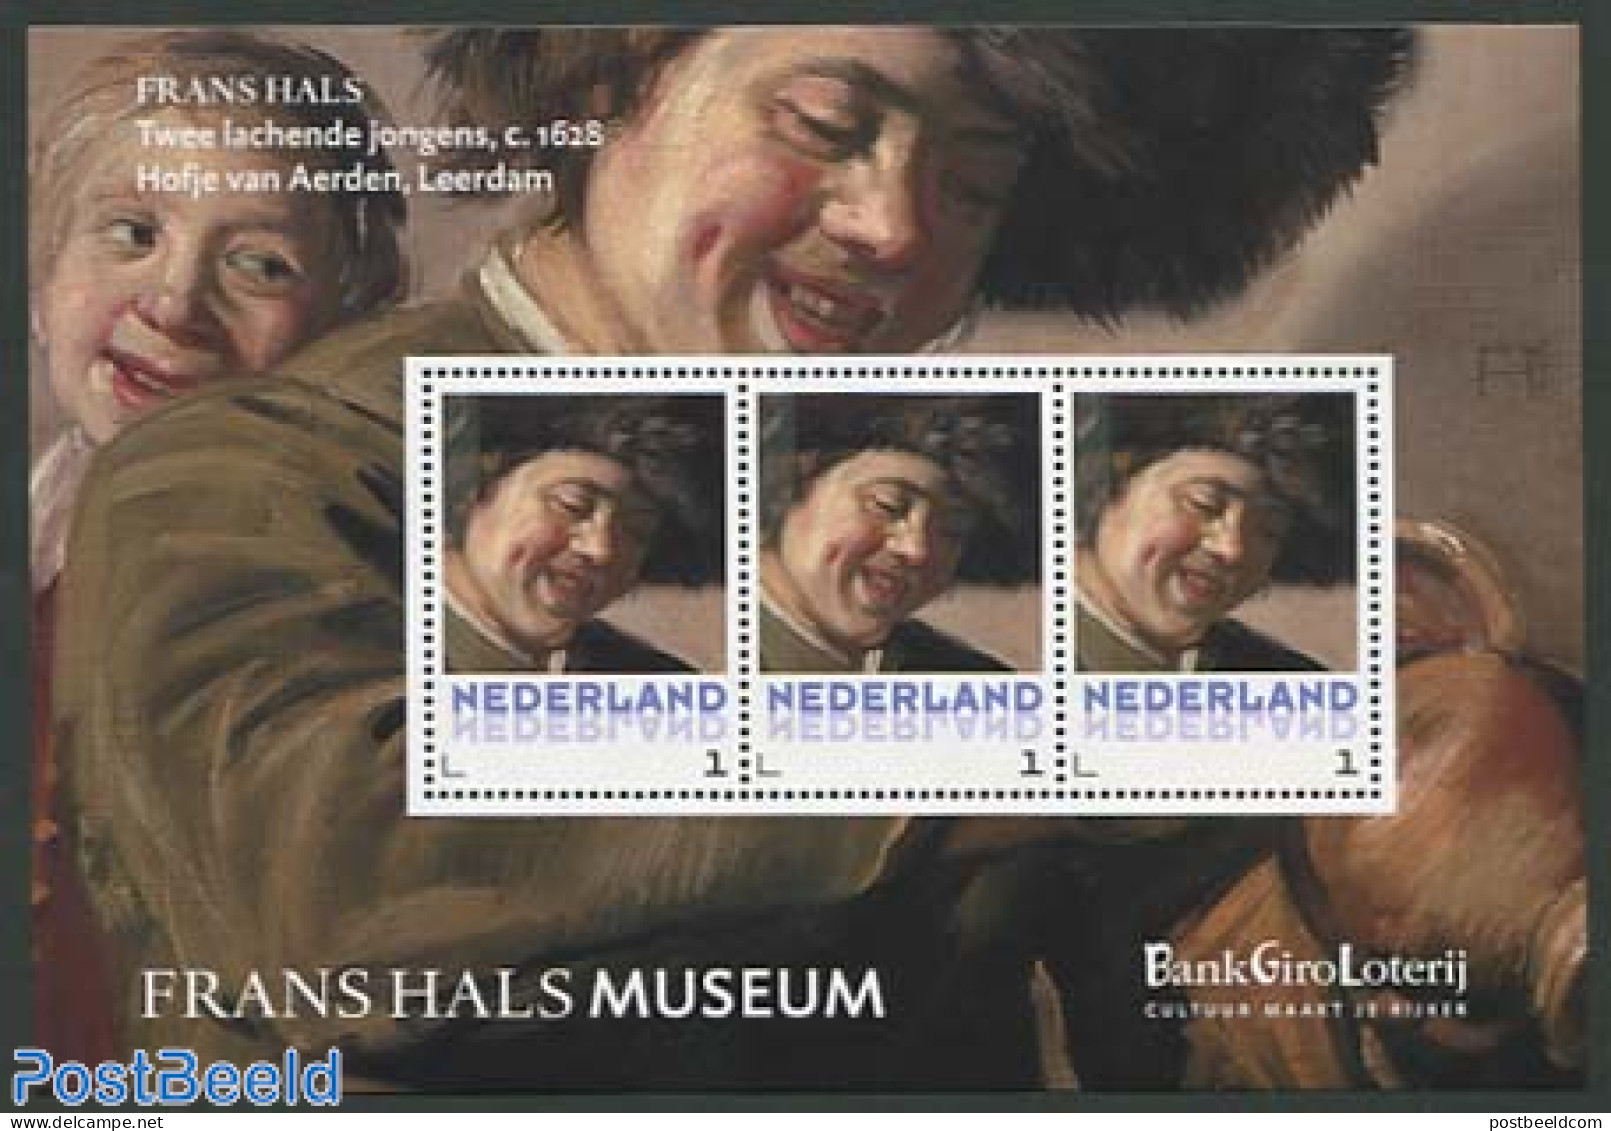 Netherlands - Personal Stamps TNT/PNL 2013 Frans Hals Museum 3v M/s, Mint NH, Art - Museums - Paintings - Museums